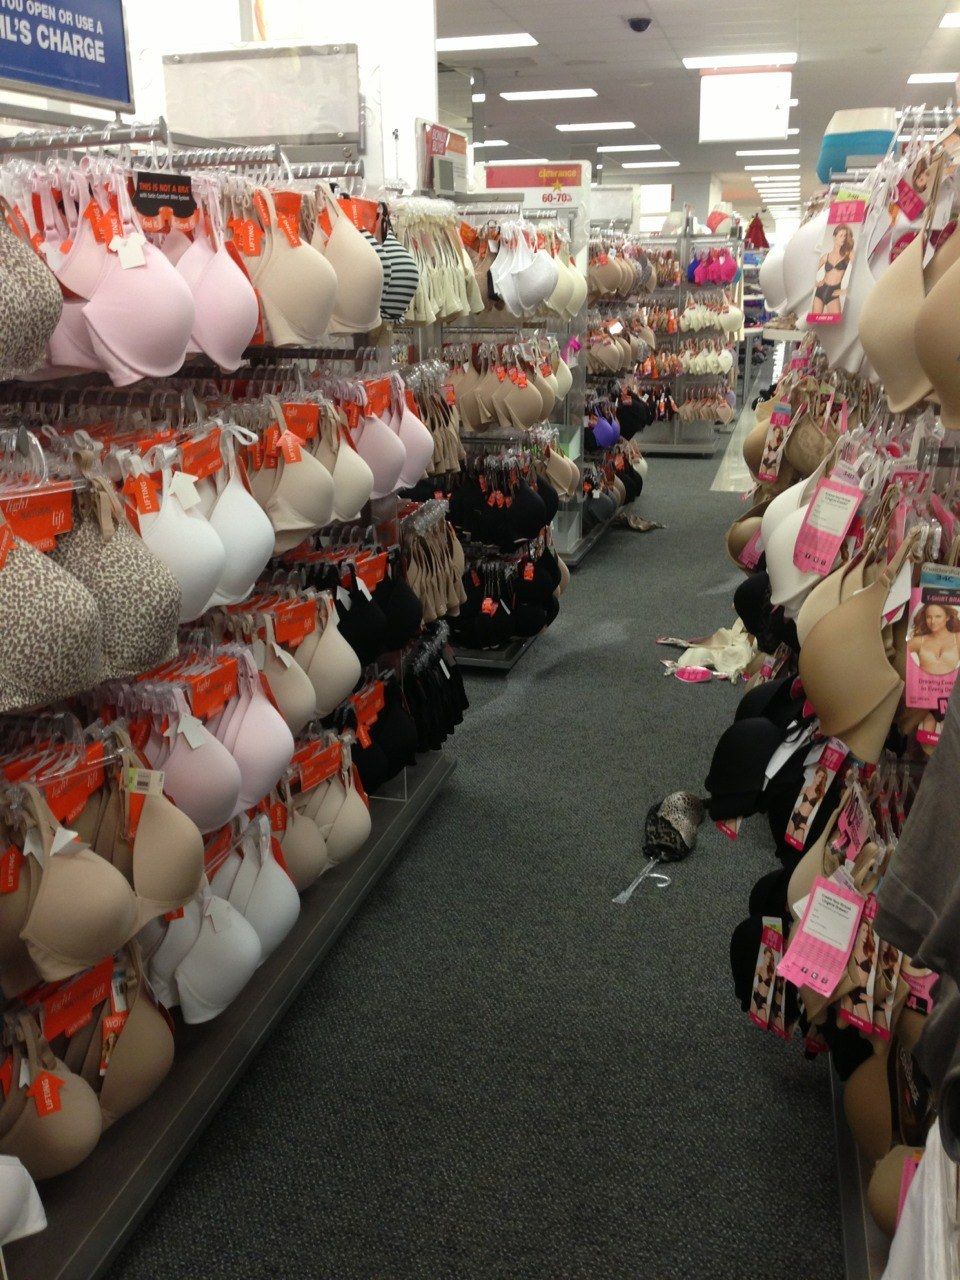 JCPenney Bras Sale! Get Them Buy 2, Get FREE!!, 45% OFF